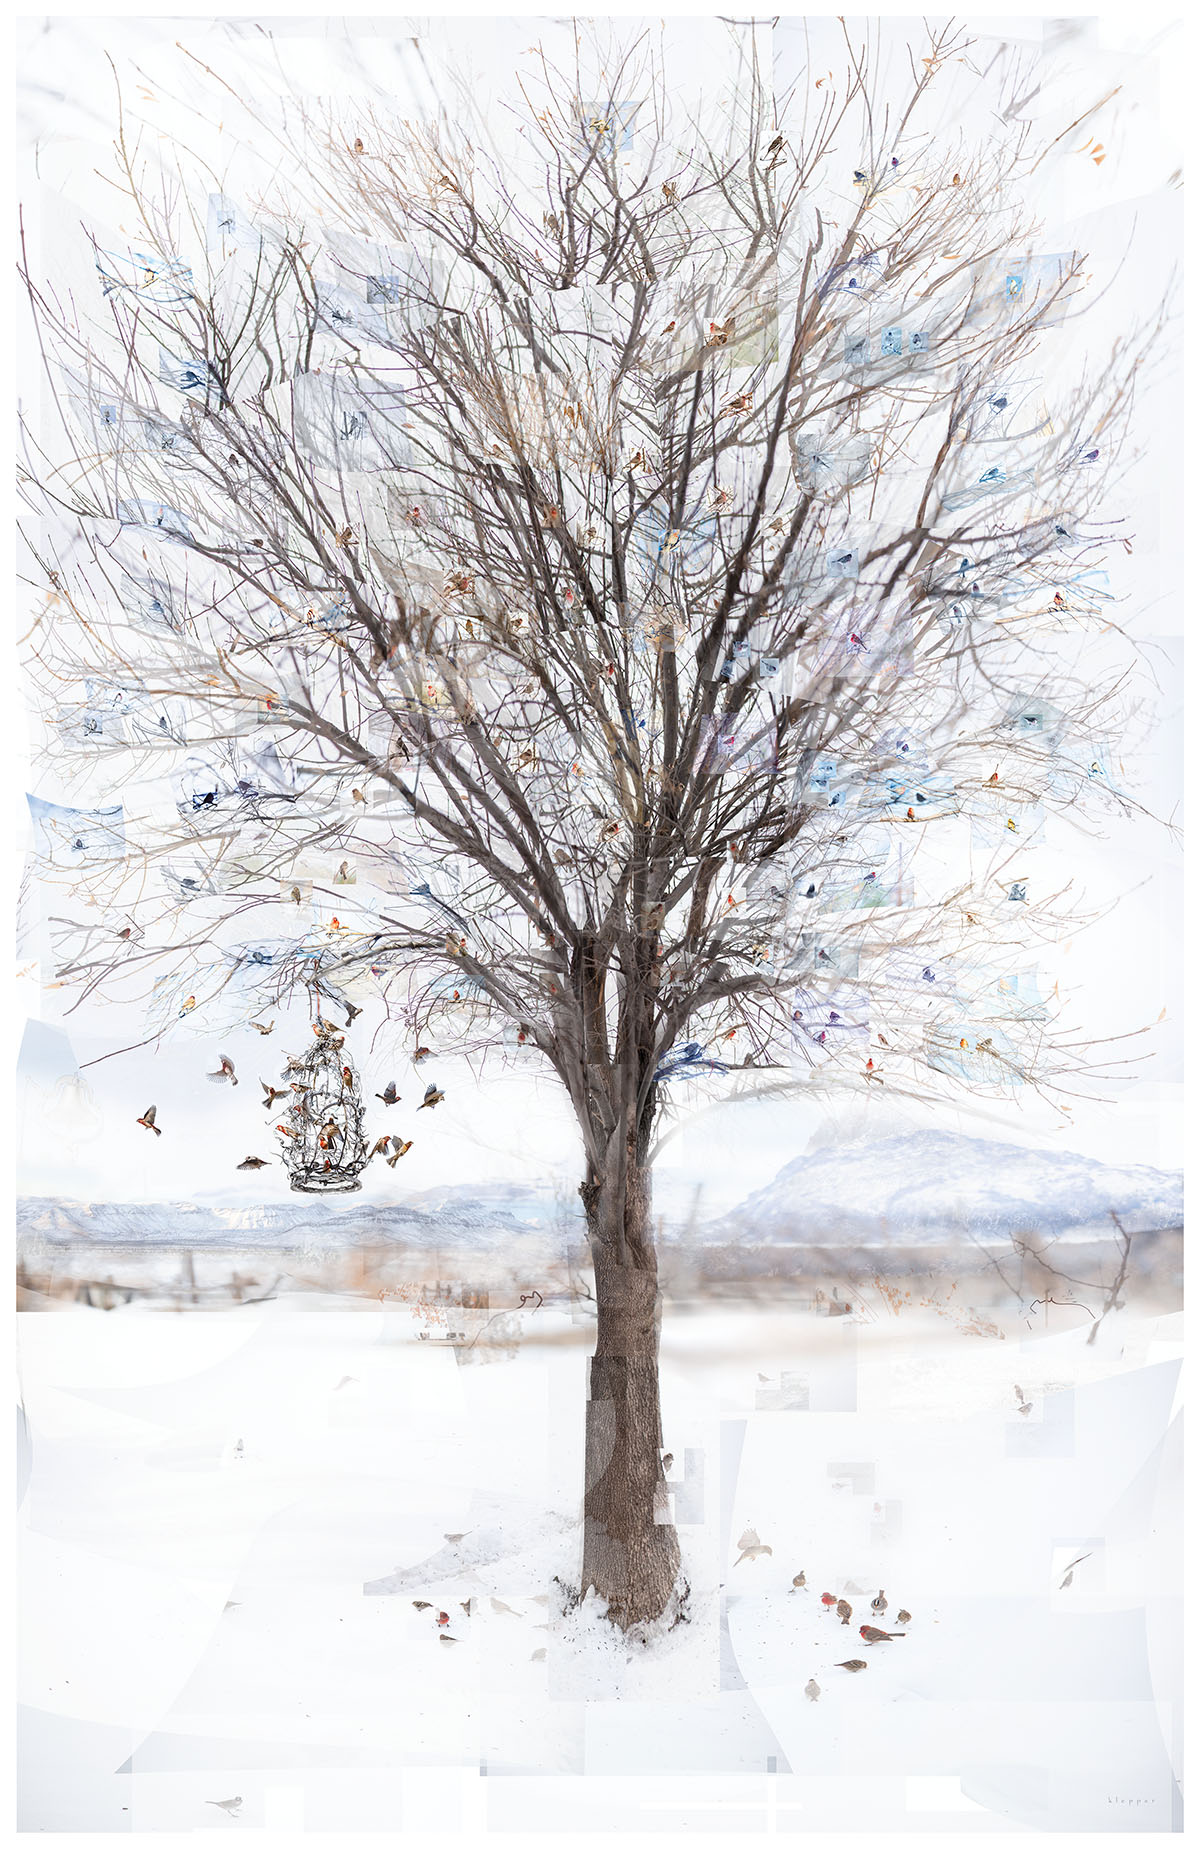 A composite image of birds in a winter tree with no leaves on a snowy landscape